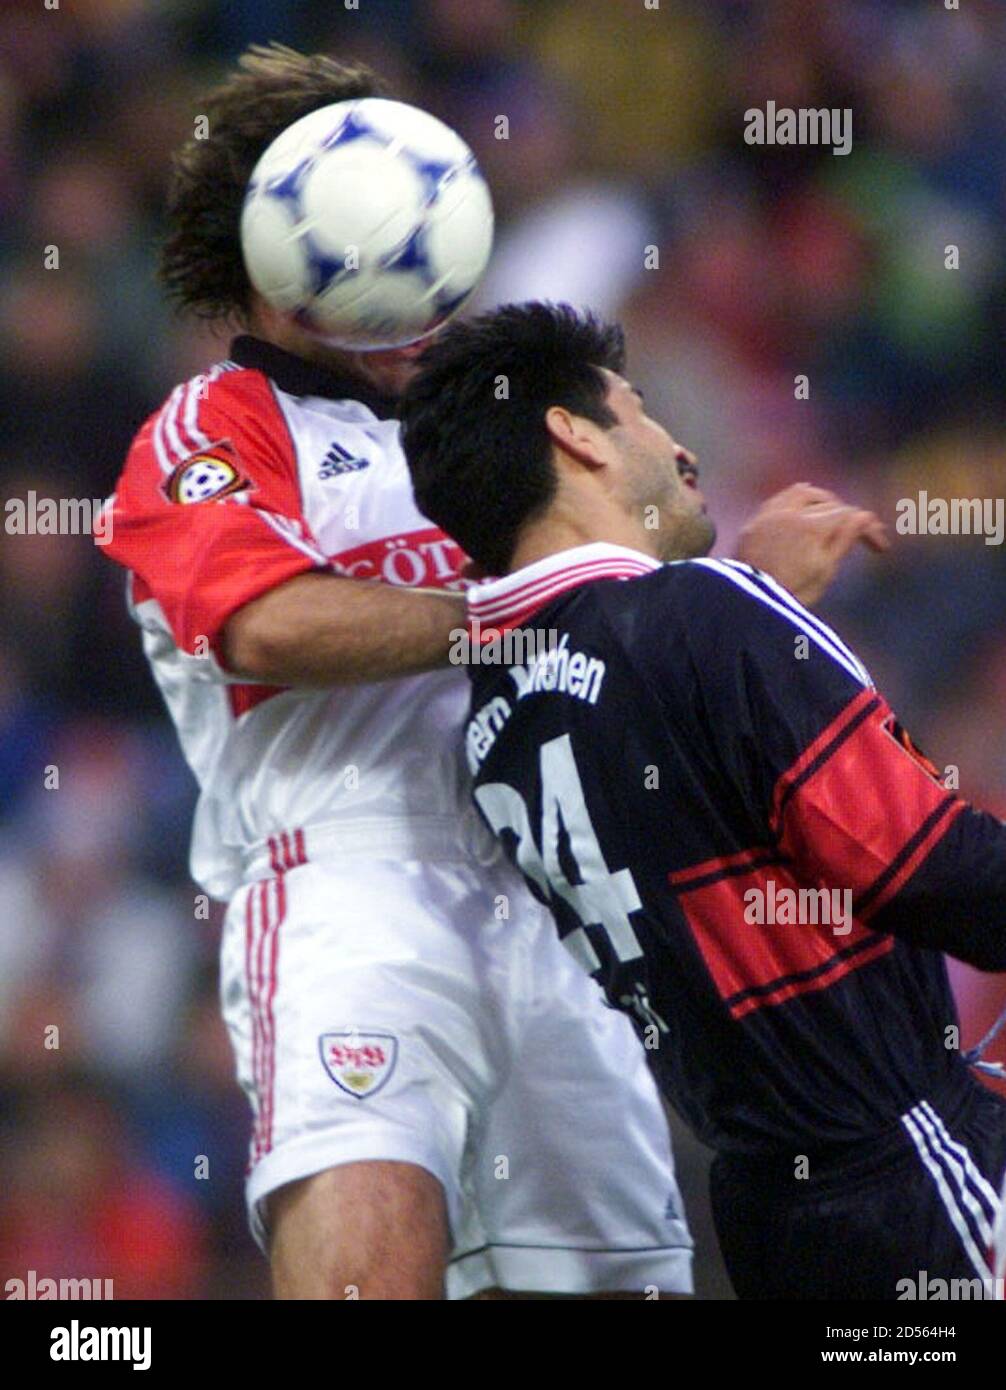 Timo Rost (L) of VFB Stuttgart heads the ball before Ali Daei of FC Bayern  Munich during the first minutes of their first division soccer match  November 14. MAD/ME Stock Photo -